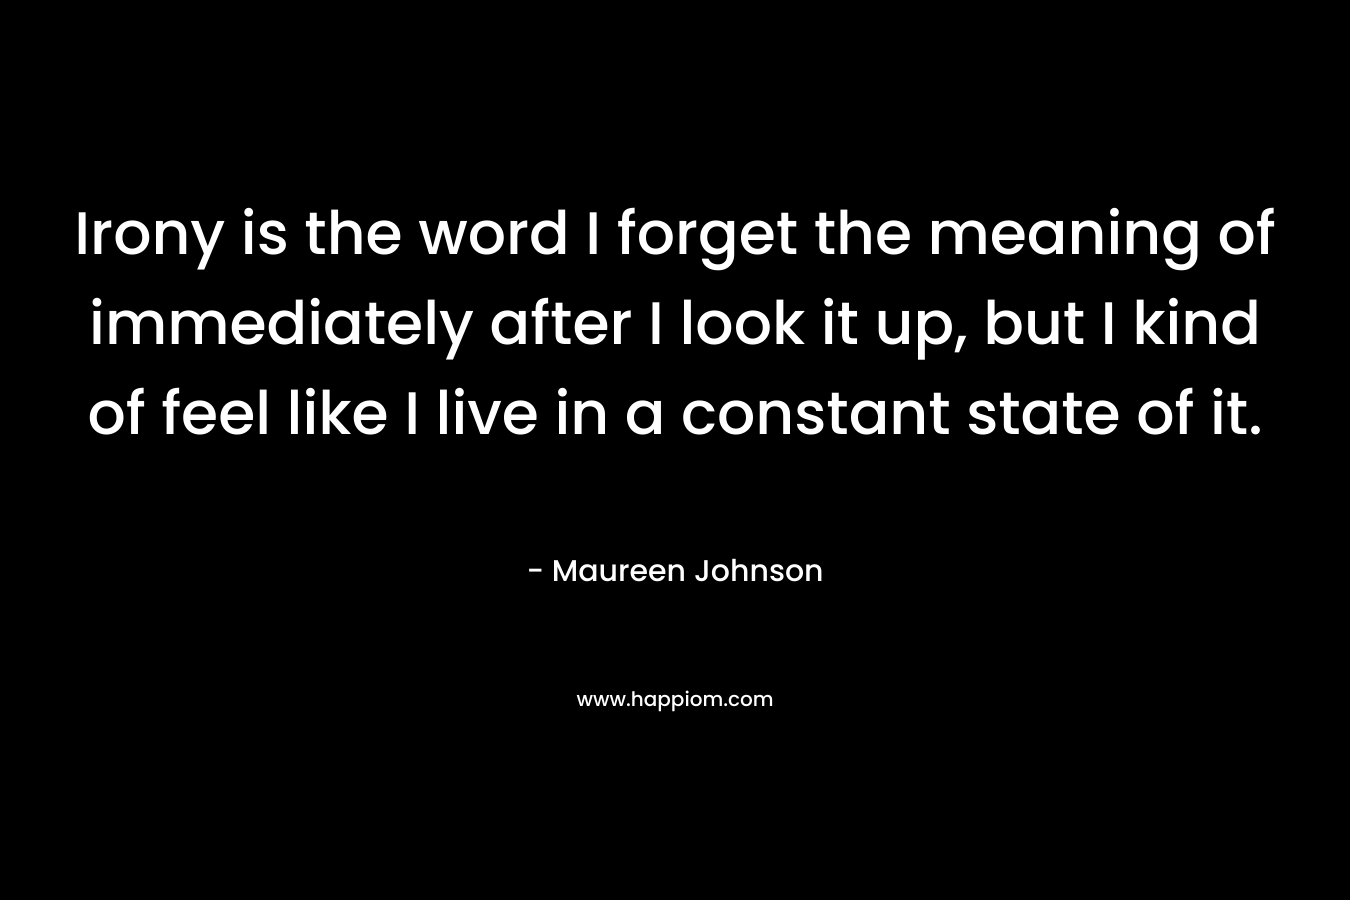 Irony is the word I forget the meaning of immediately after I look it up, but I kind of feel like I live in a constant state of it. – Maureen Johnson